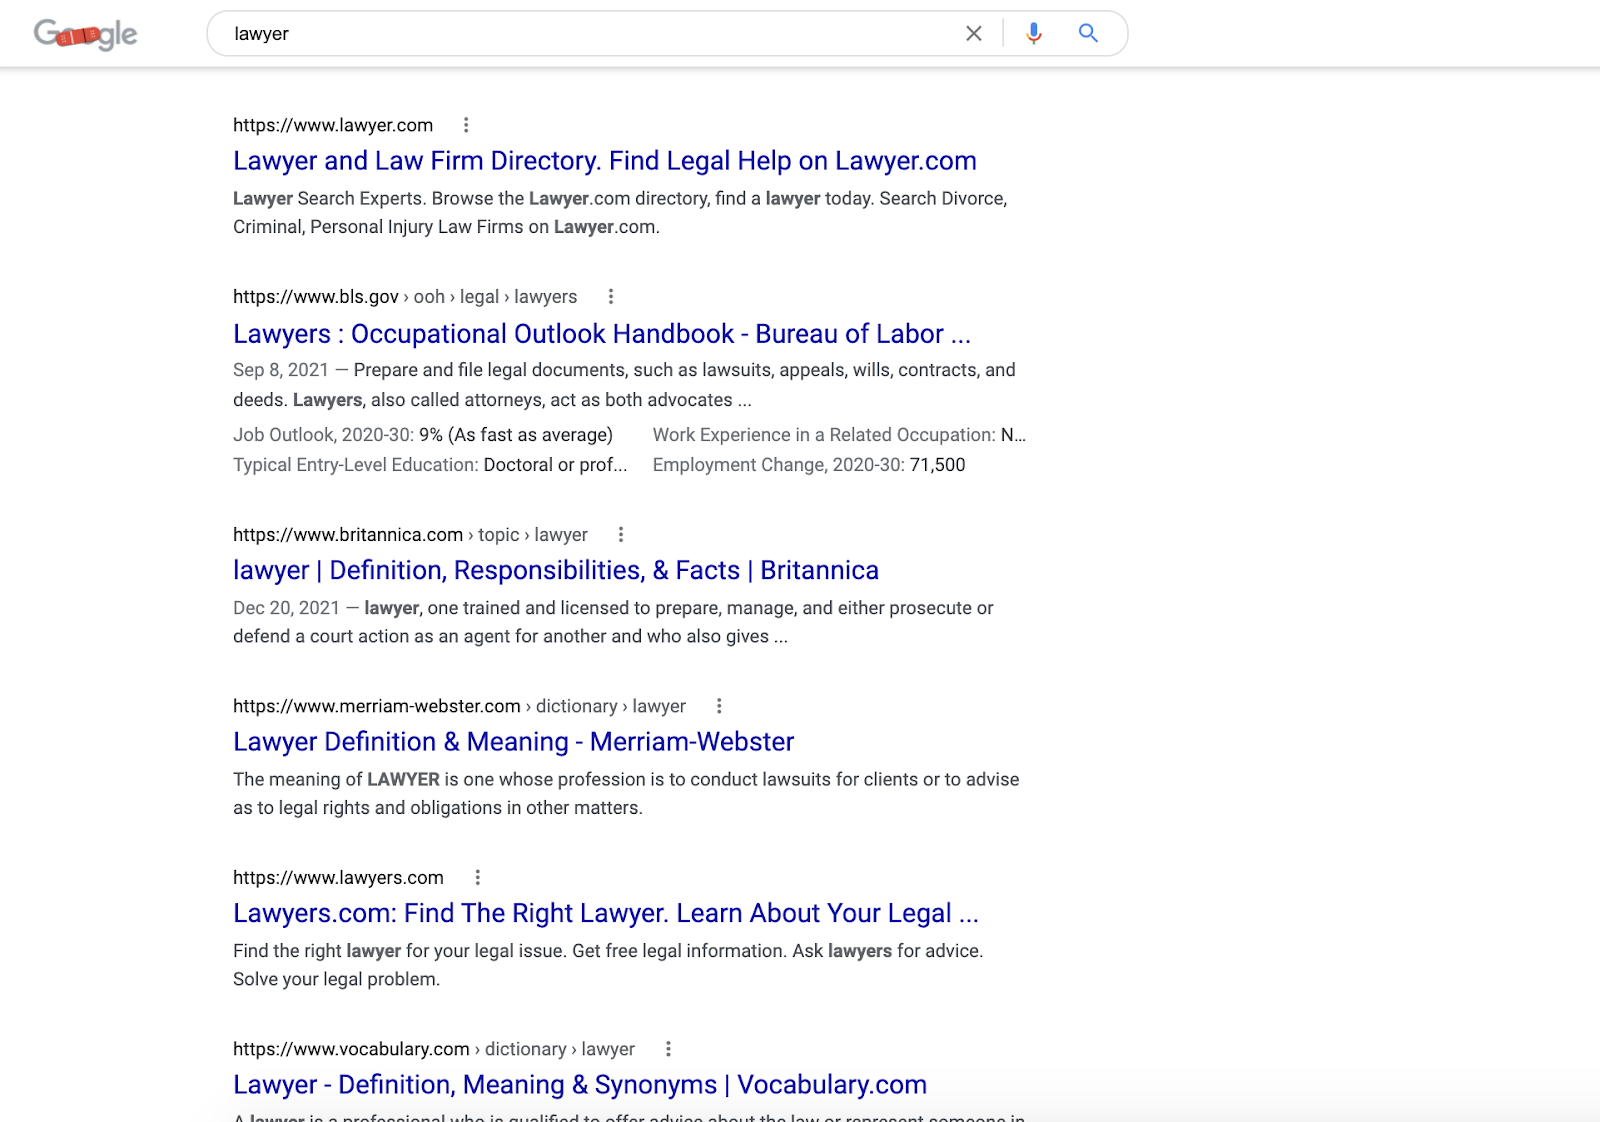 screenshot of the google search results for lawyer